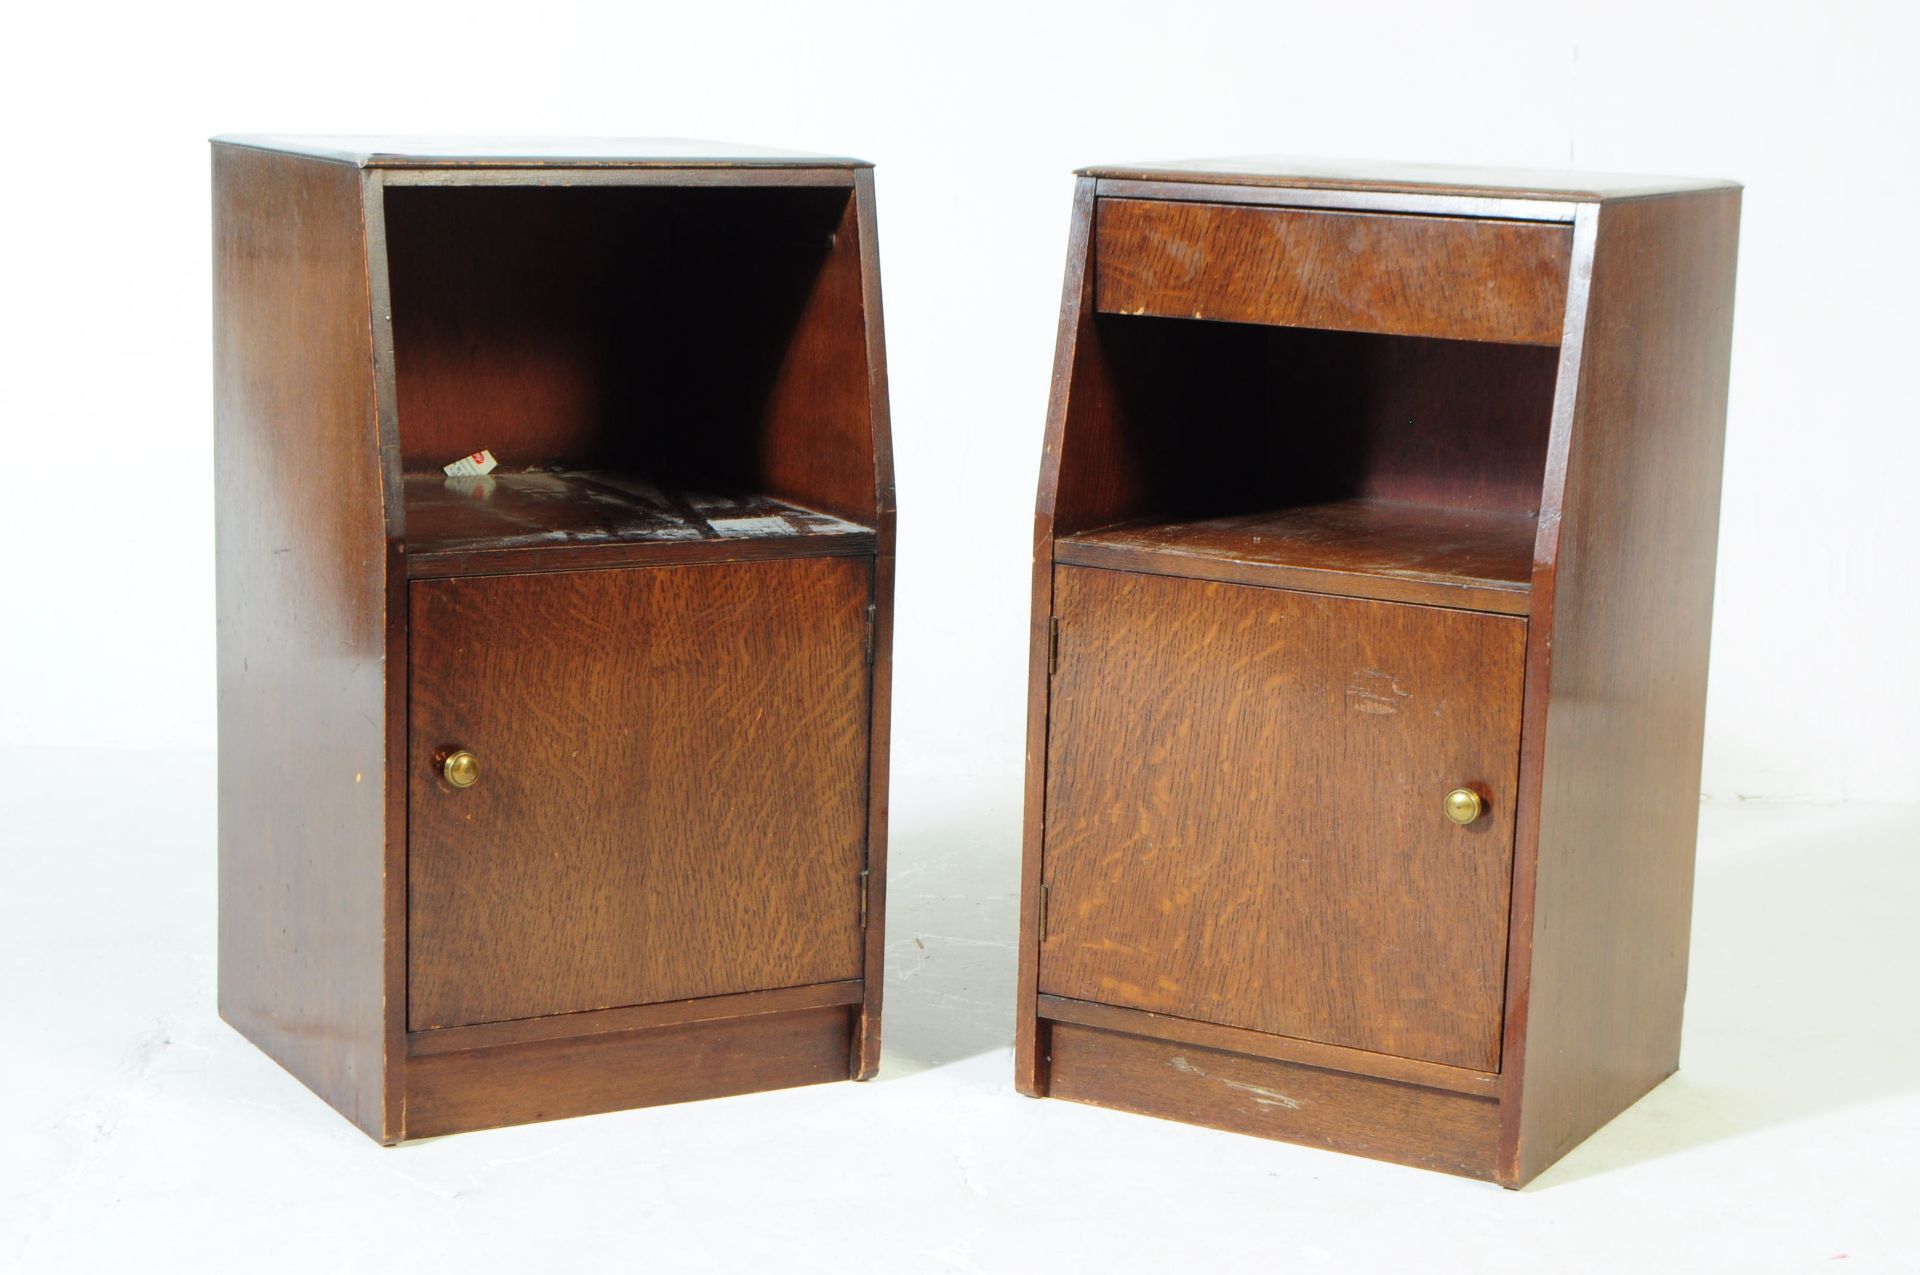 PAIR OF EARLY 20TH CENTURY BEDSIDES CABINETS